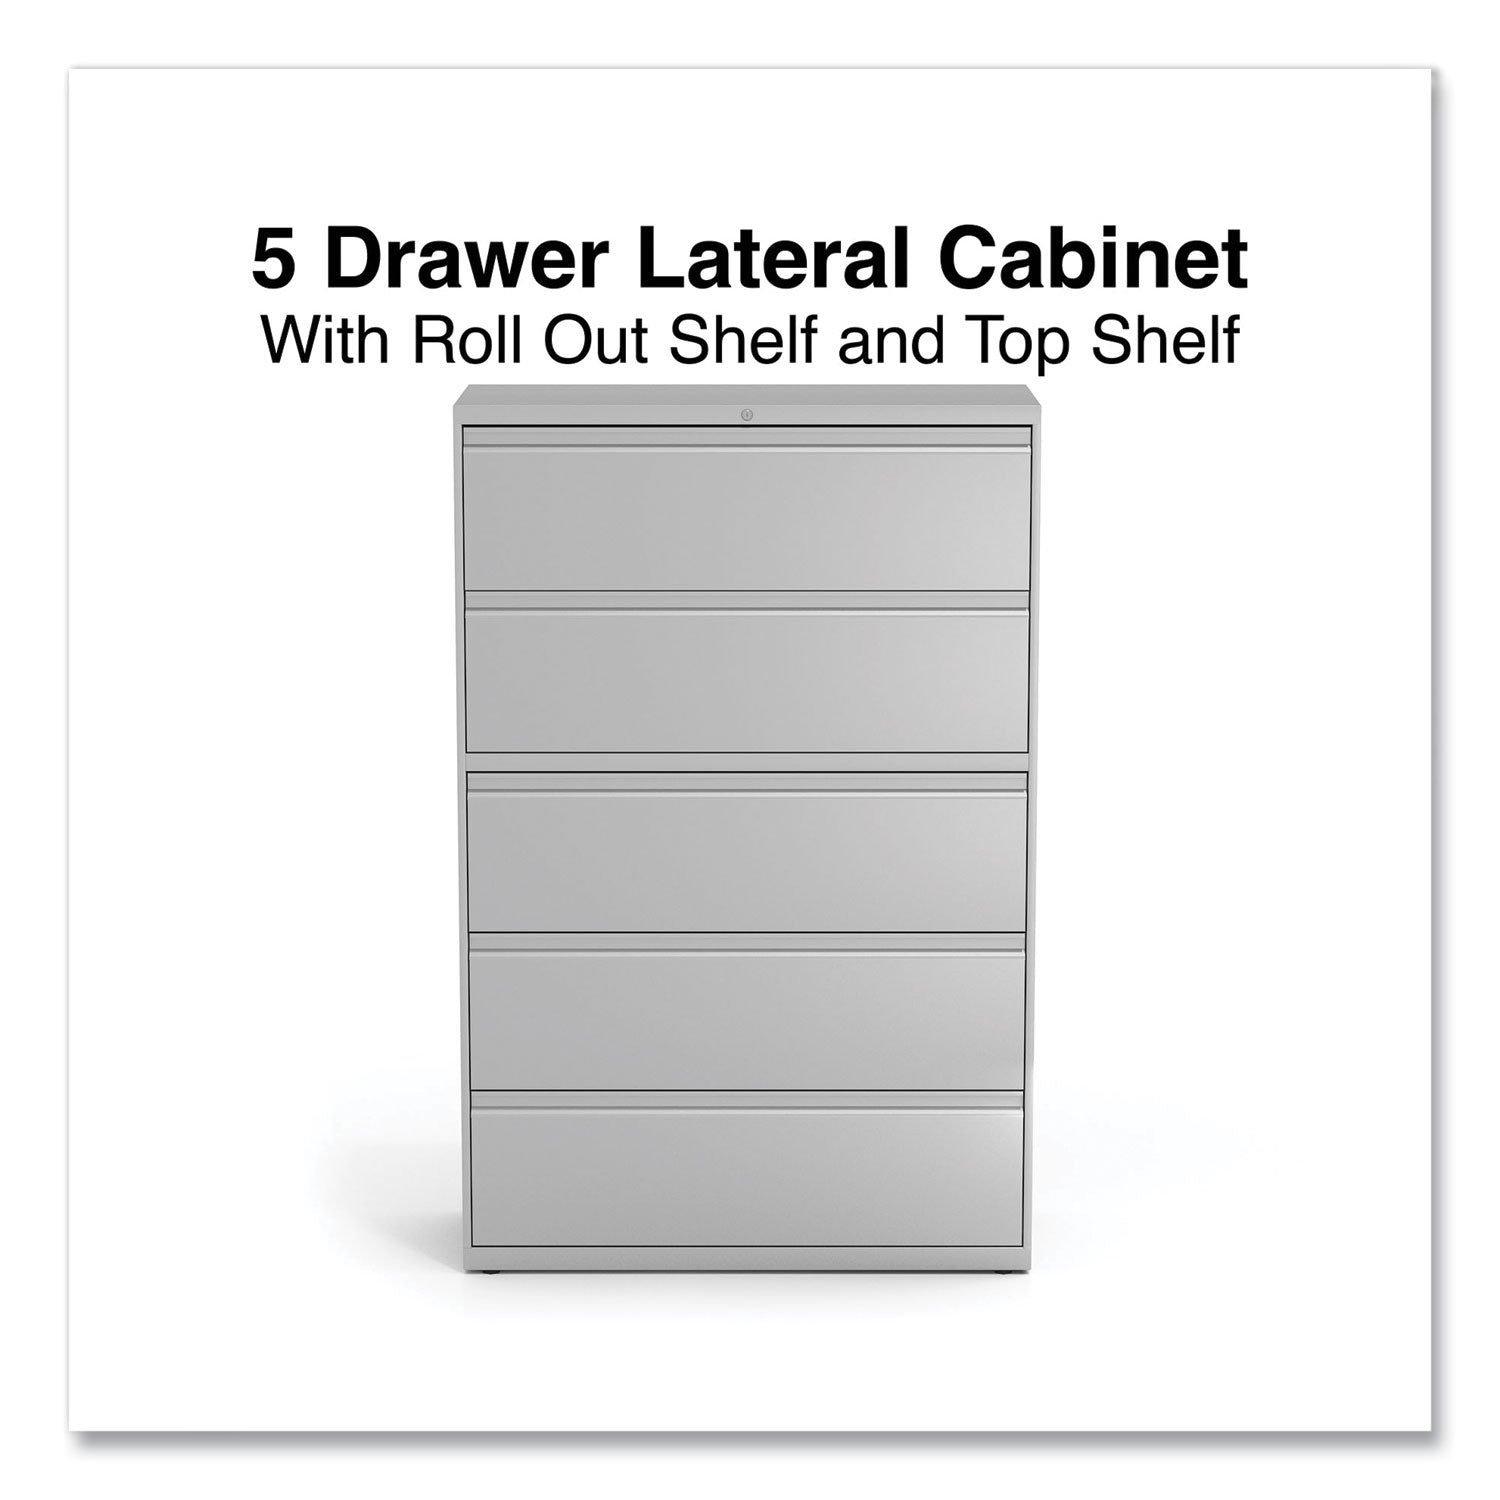 lateral-file-5-legal-letter-a4-a5-size-file-drawers-1-roll-out-posting-shelf-light-gray-42-x-1863-x-6763_alehlf4267lg - 2